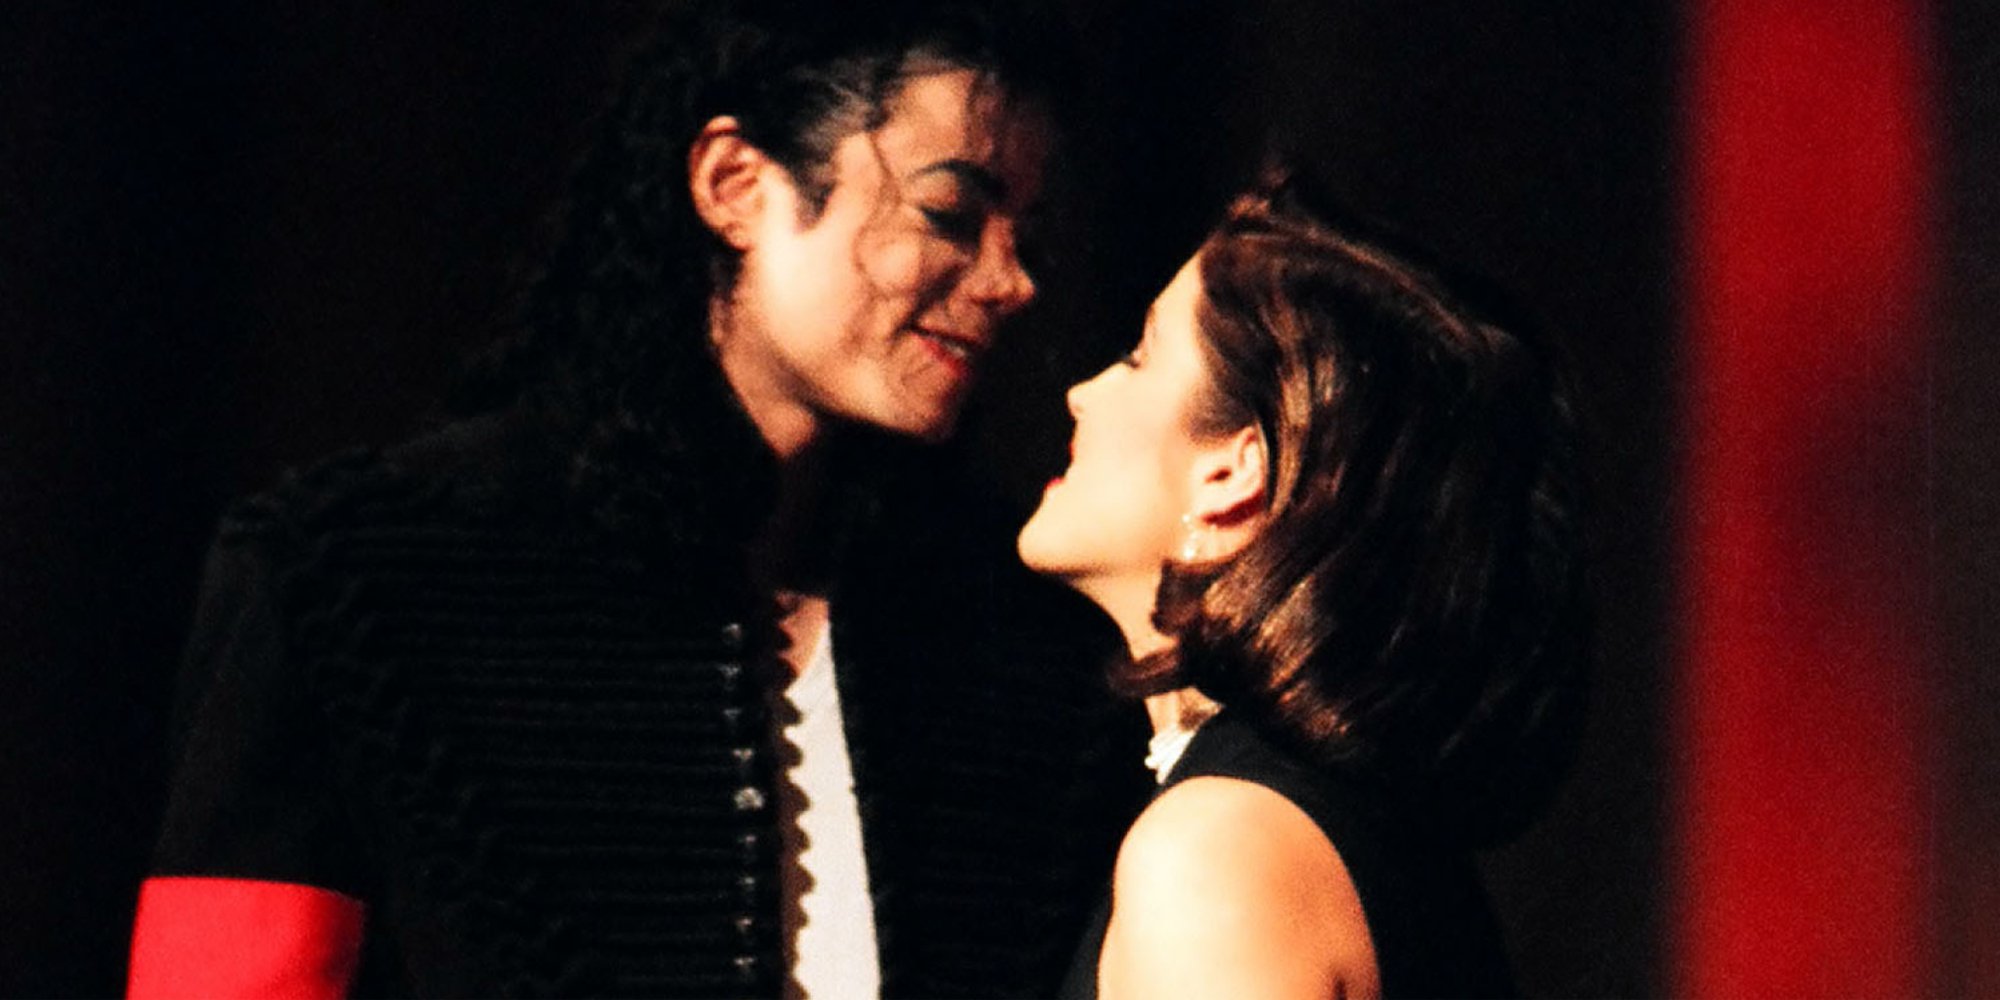 Michael Jackson and Lisa Marie Presley on stage at the MTV VMA's.